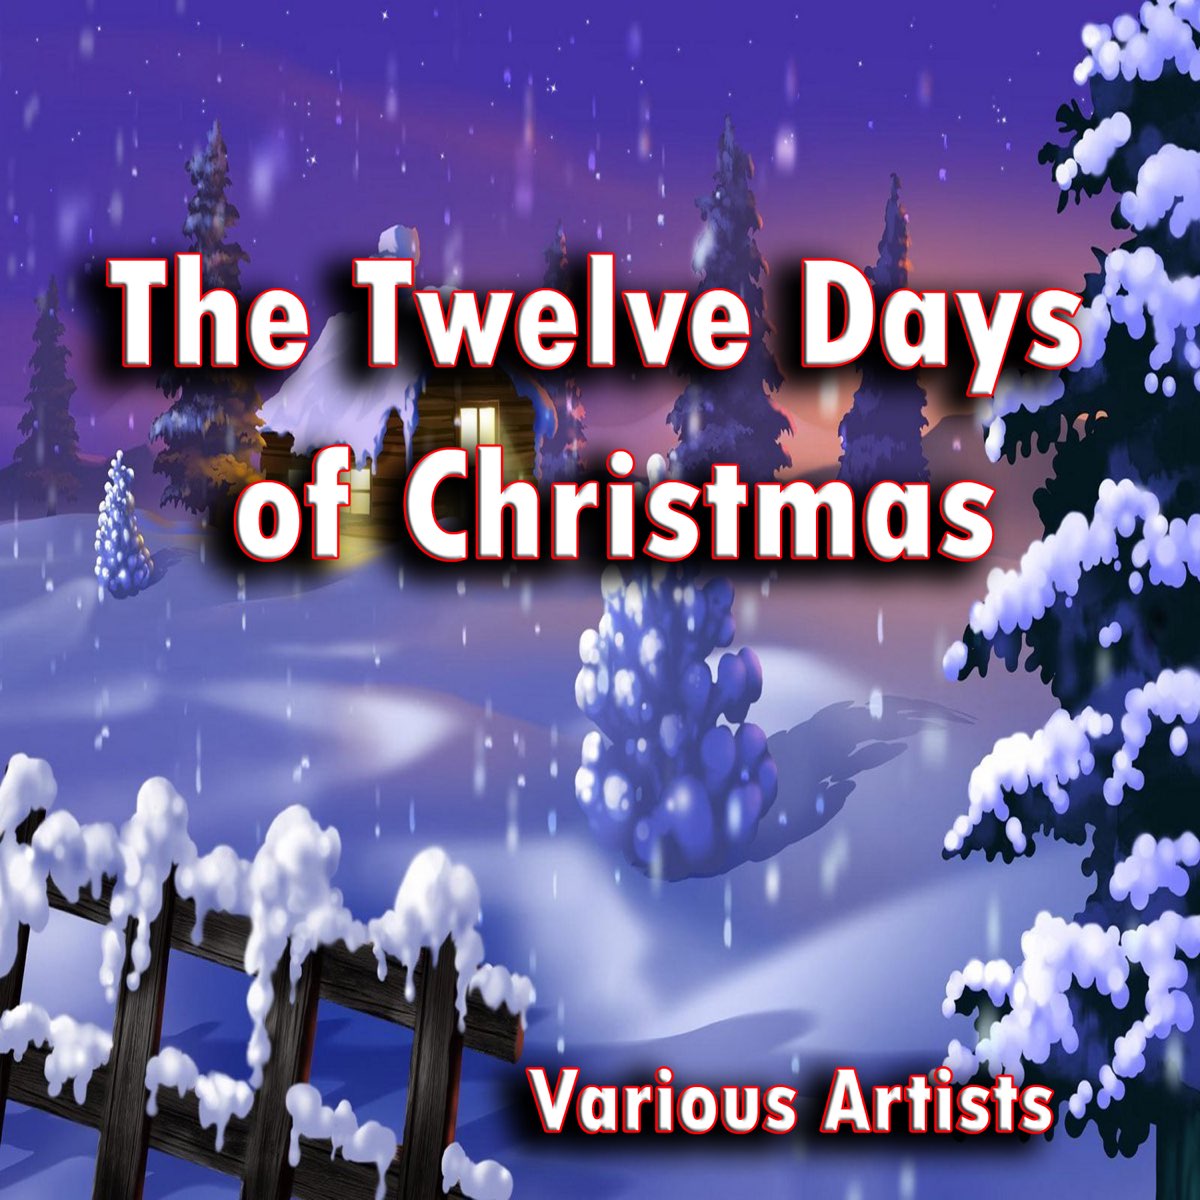 The Twelve Days of Christmas - Album by Various Artists - Apple Music